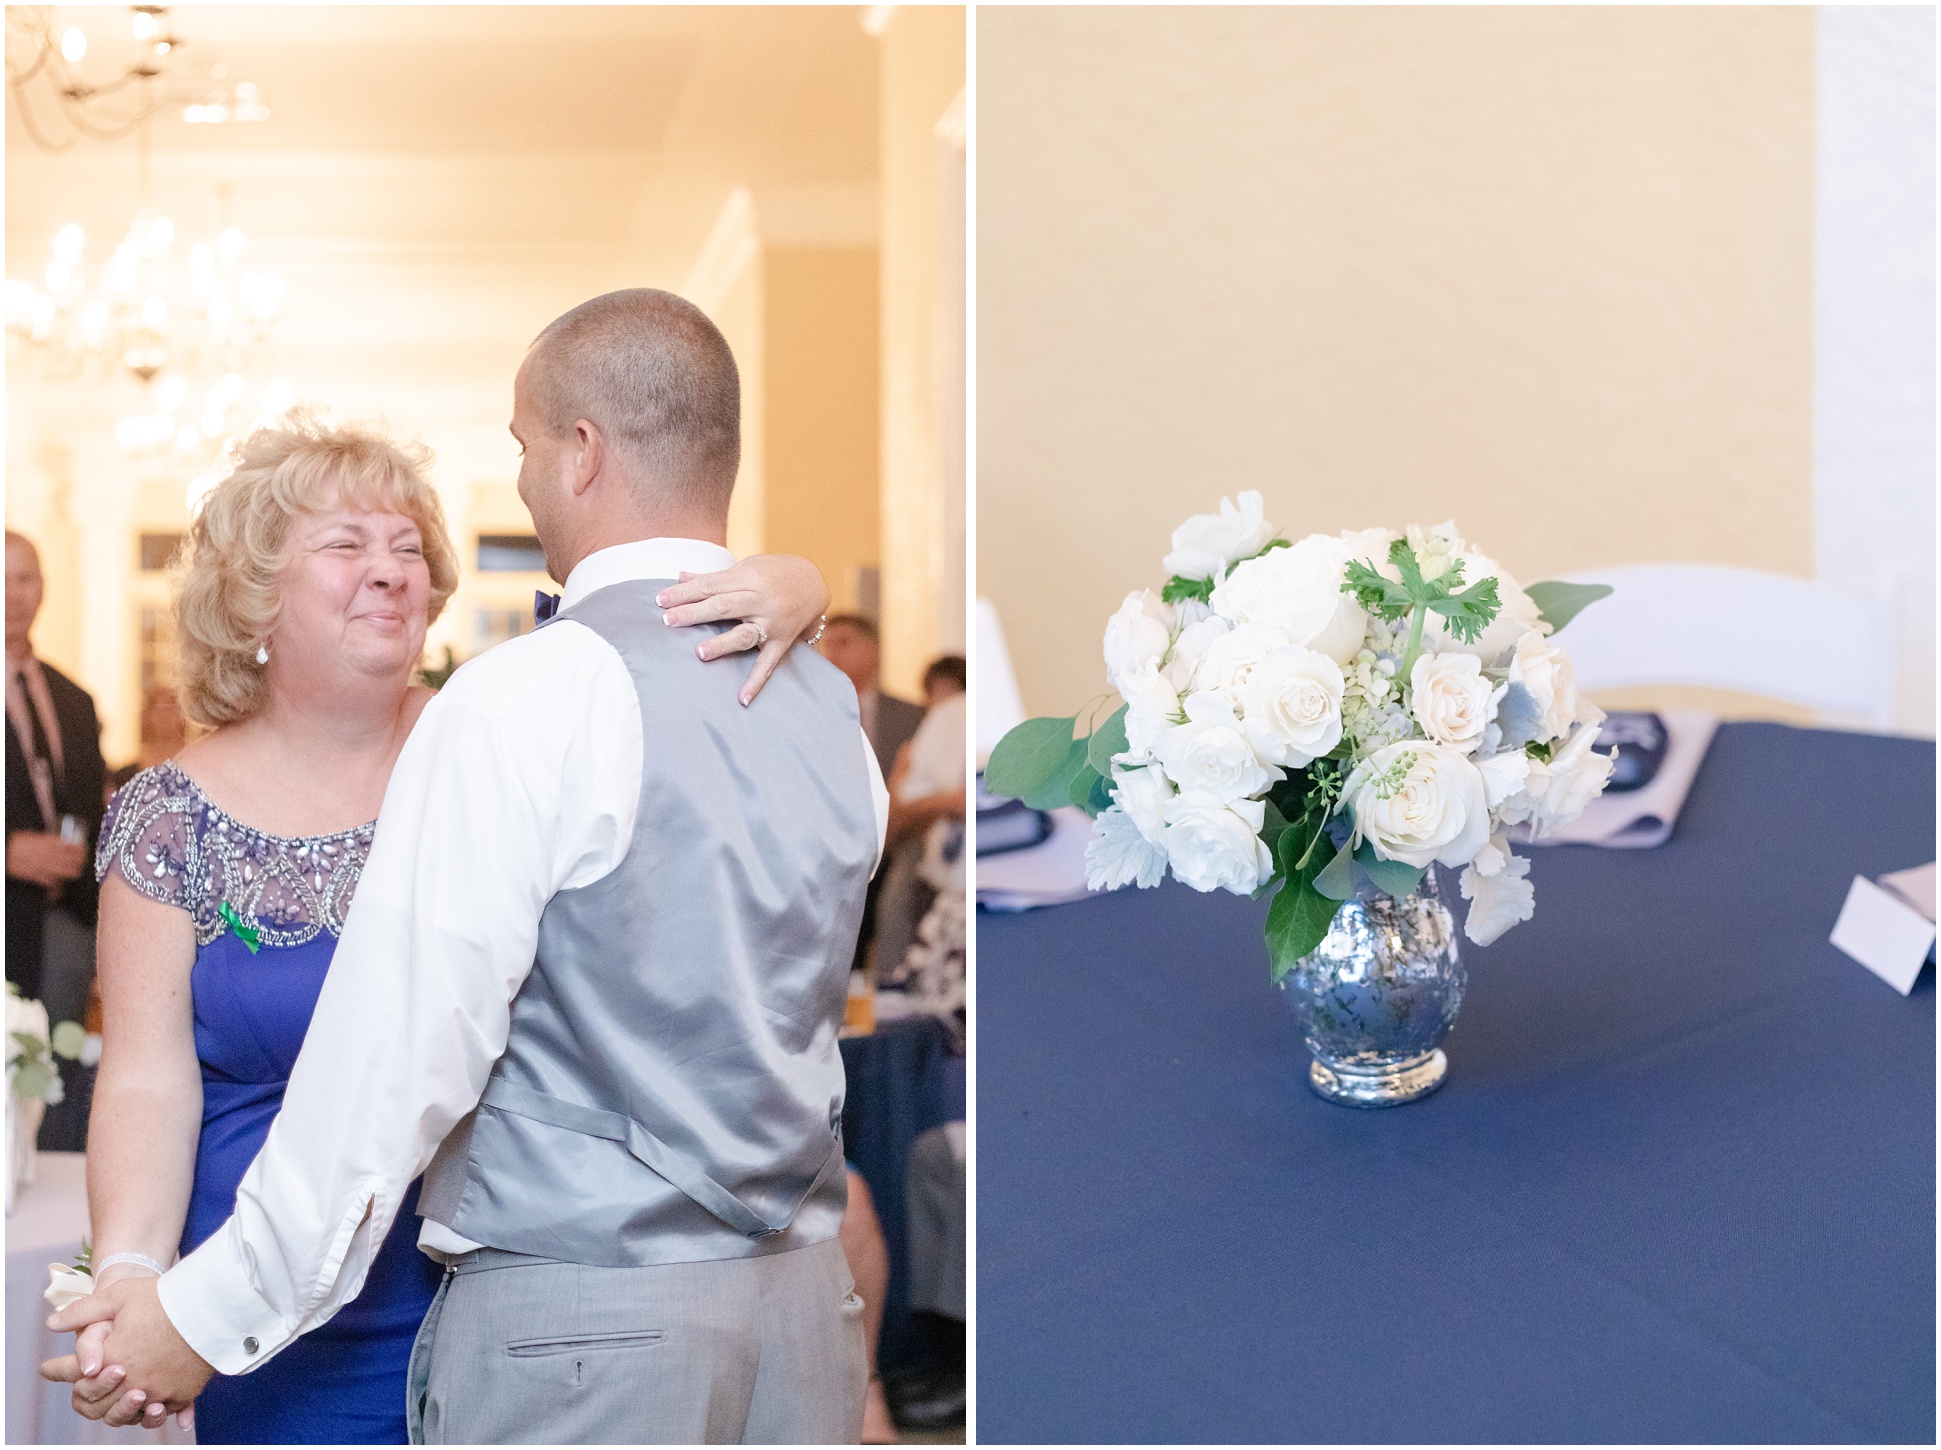 Left: Groom and his mom dancing, right: table centerpiece